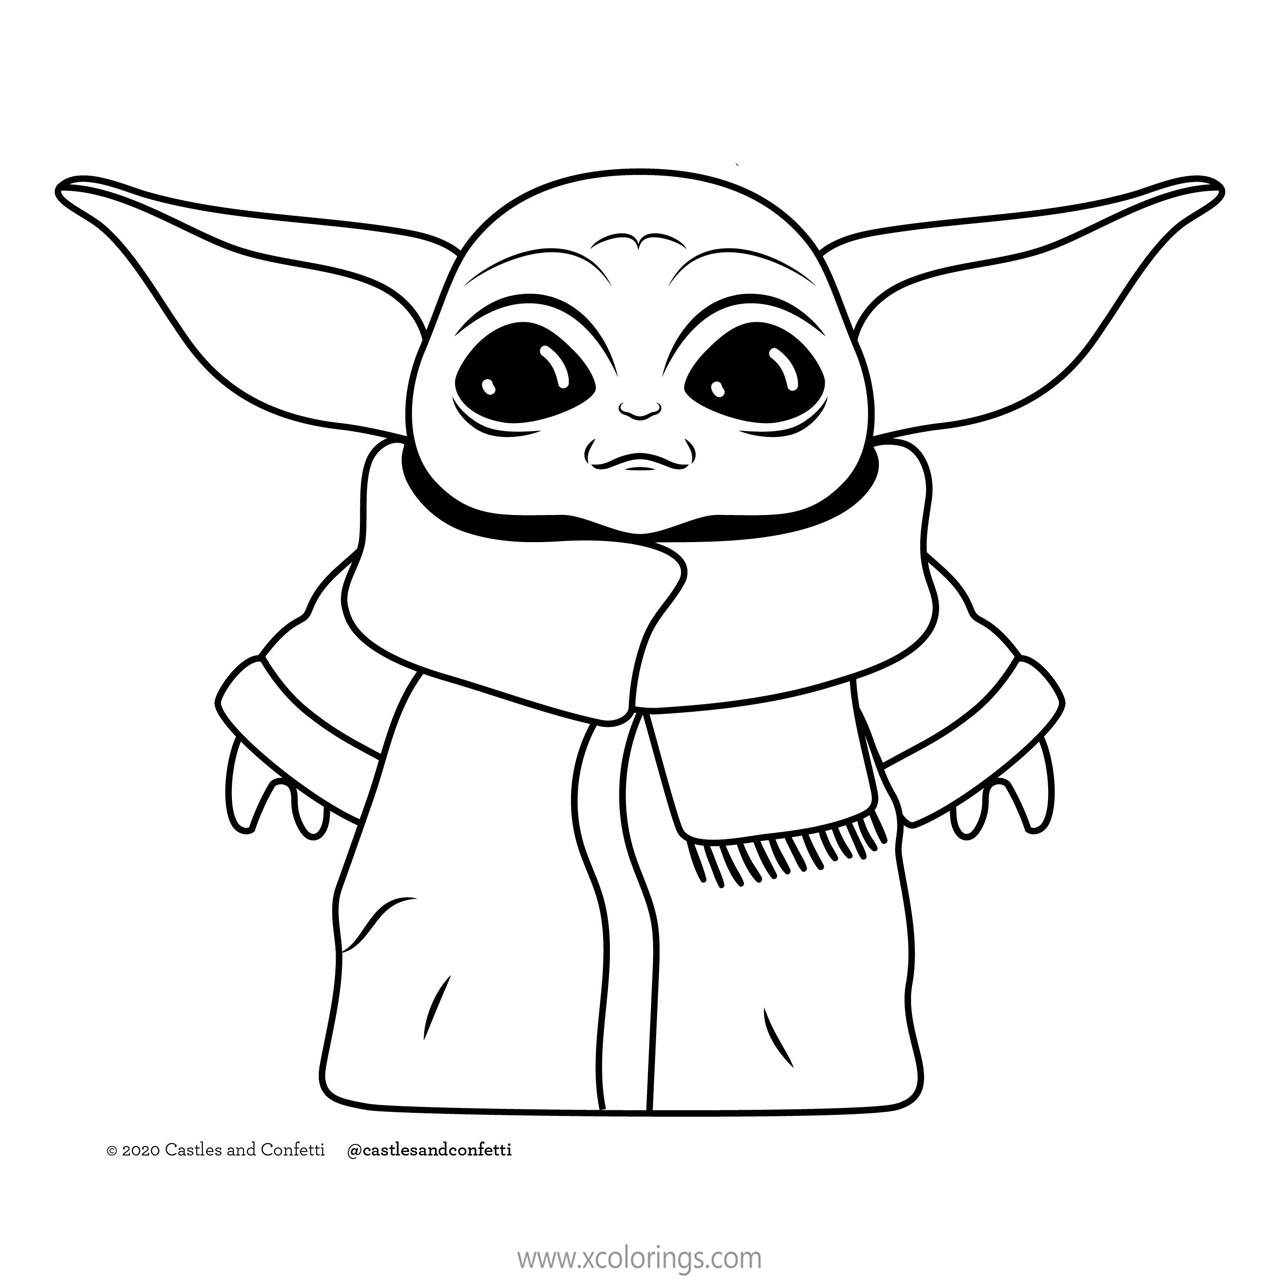 Free Baby Yoda Outline Coloring Pages printable